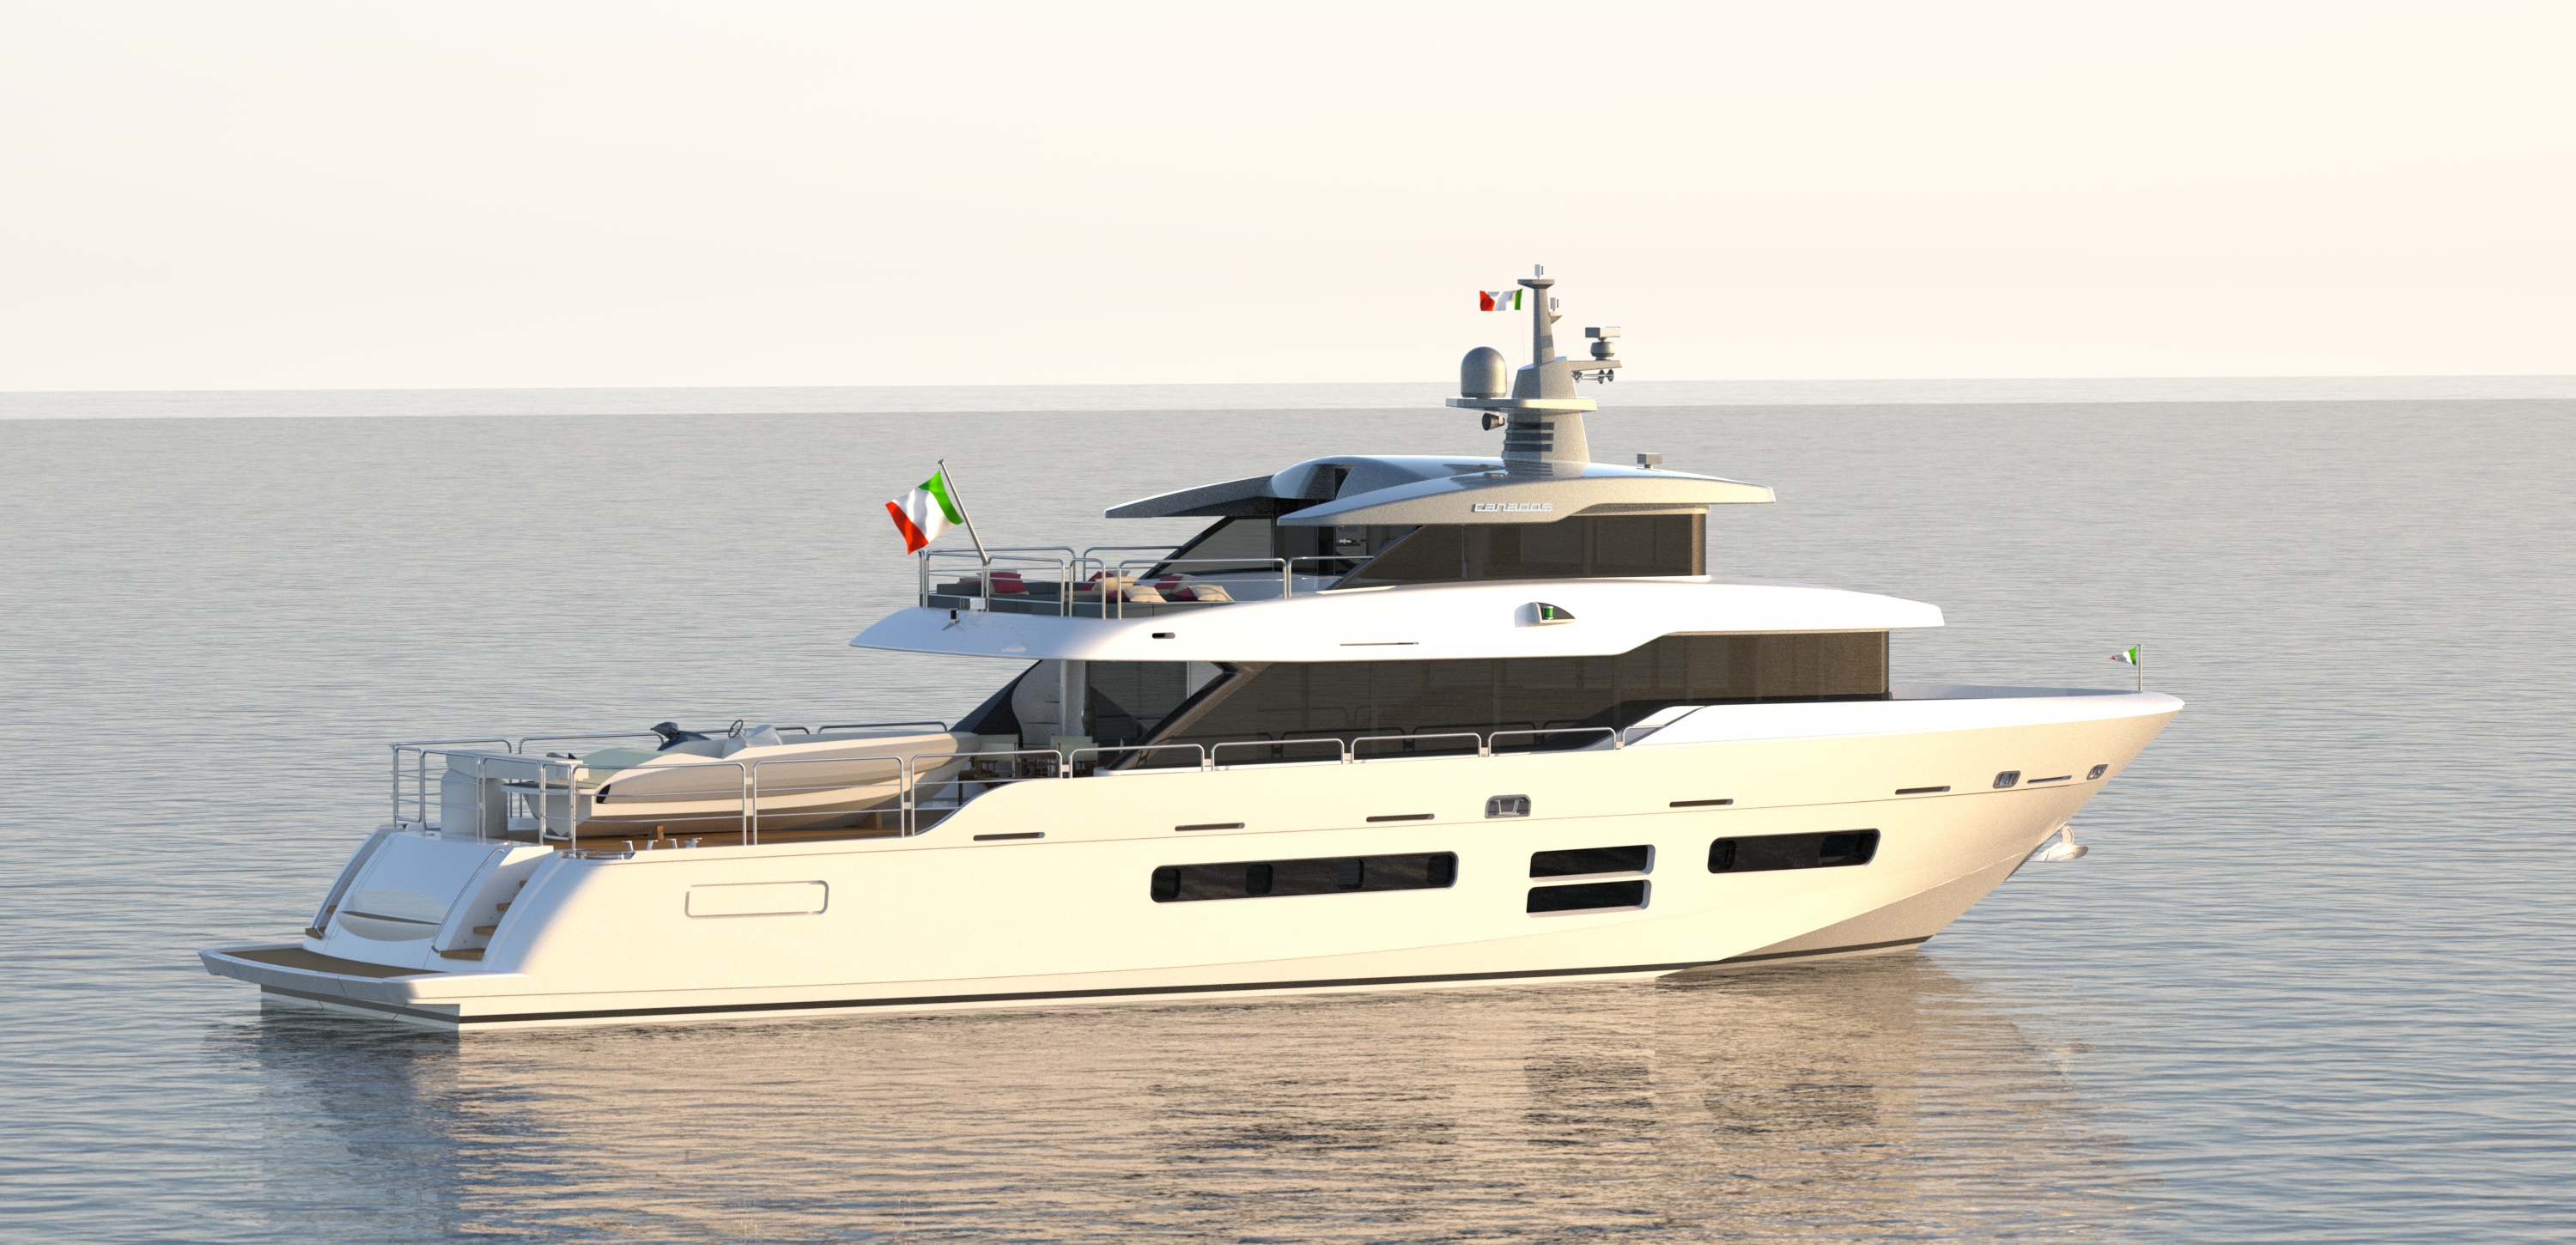  Oceanic Yachts 90’ in anteprima mondiale al Cannes Yachting Festival 2014